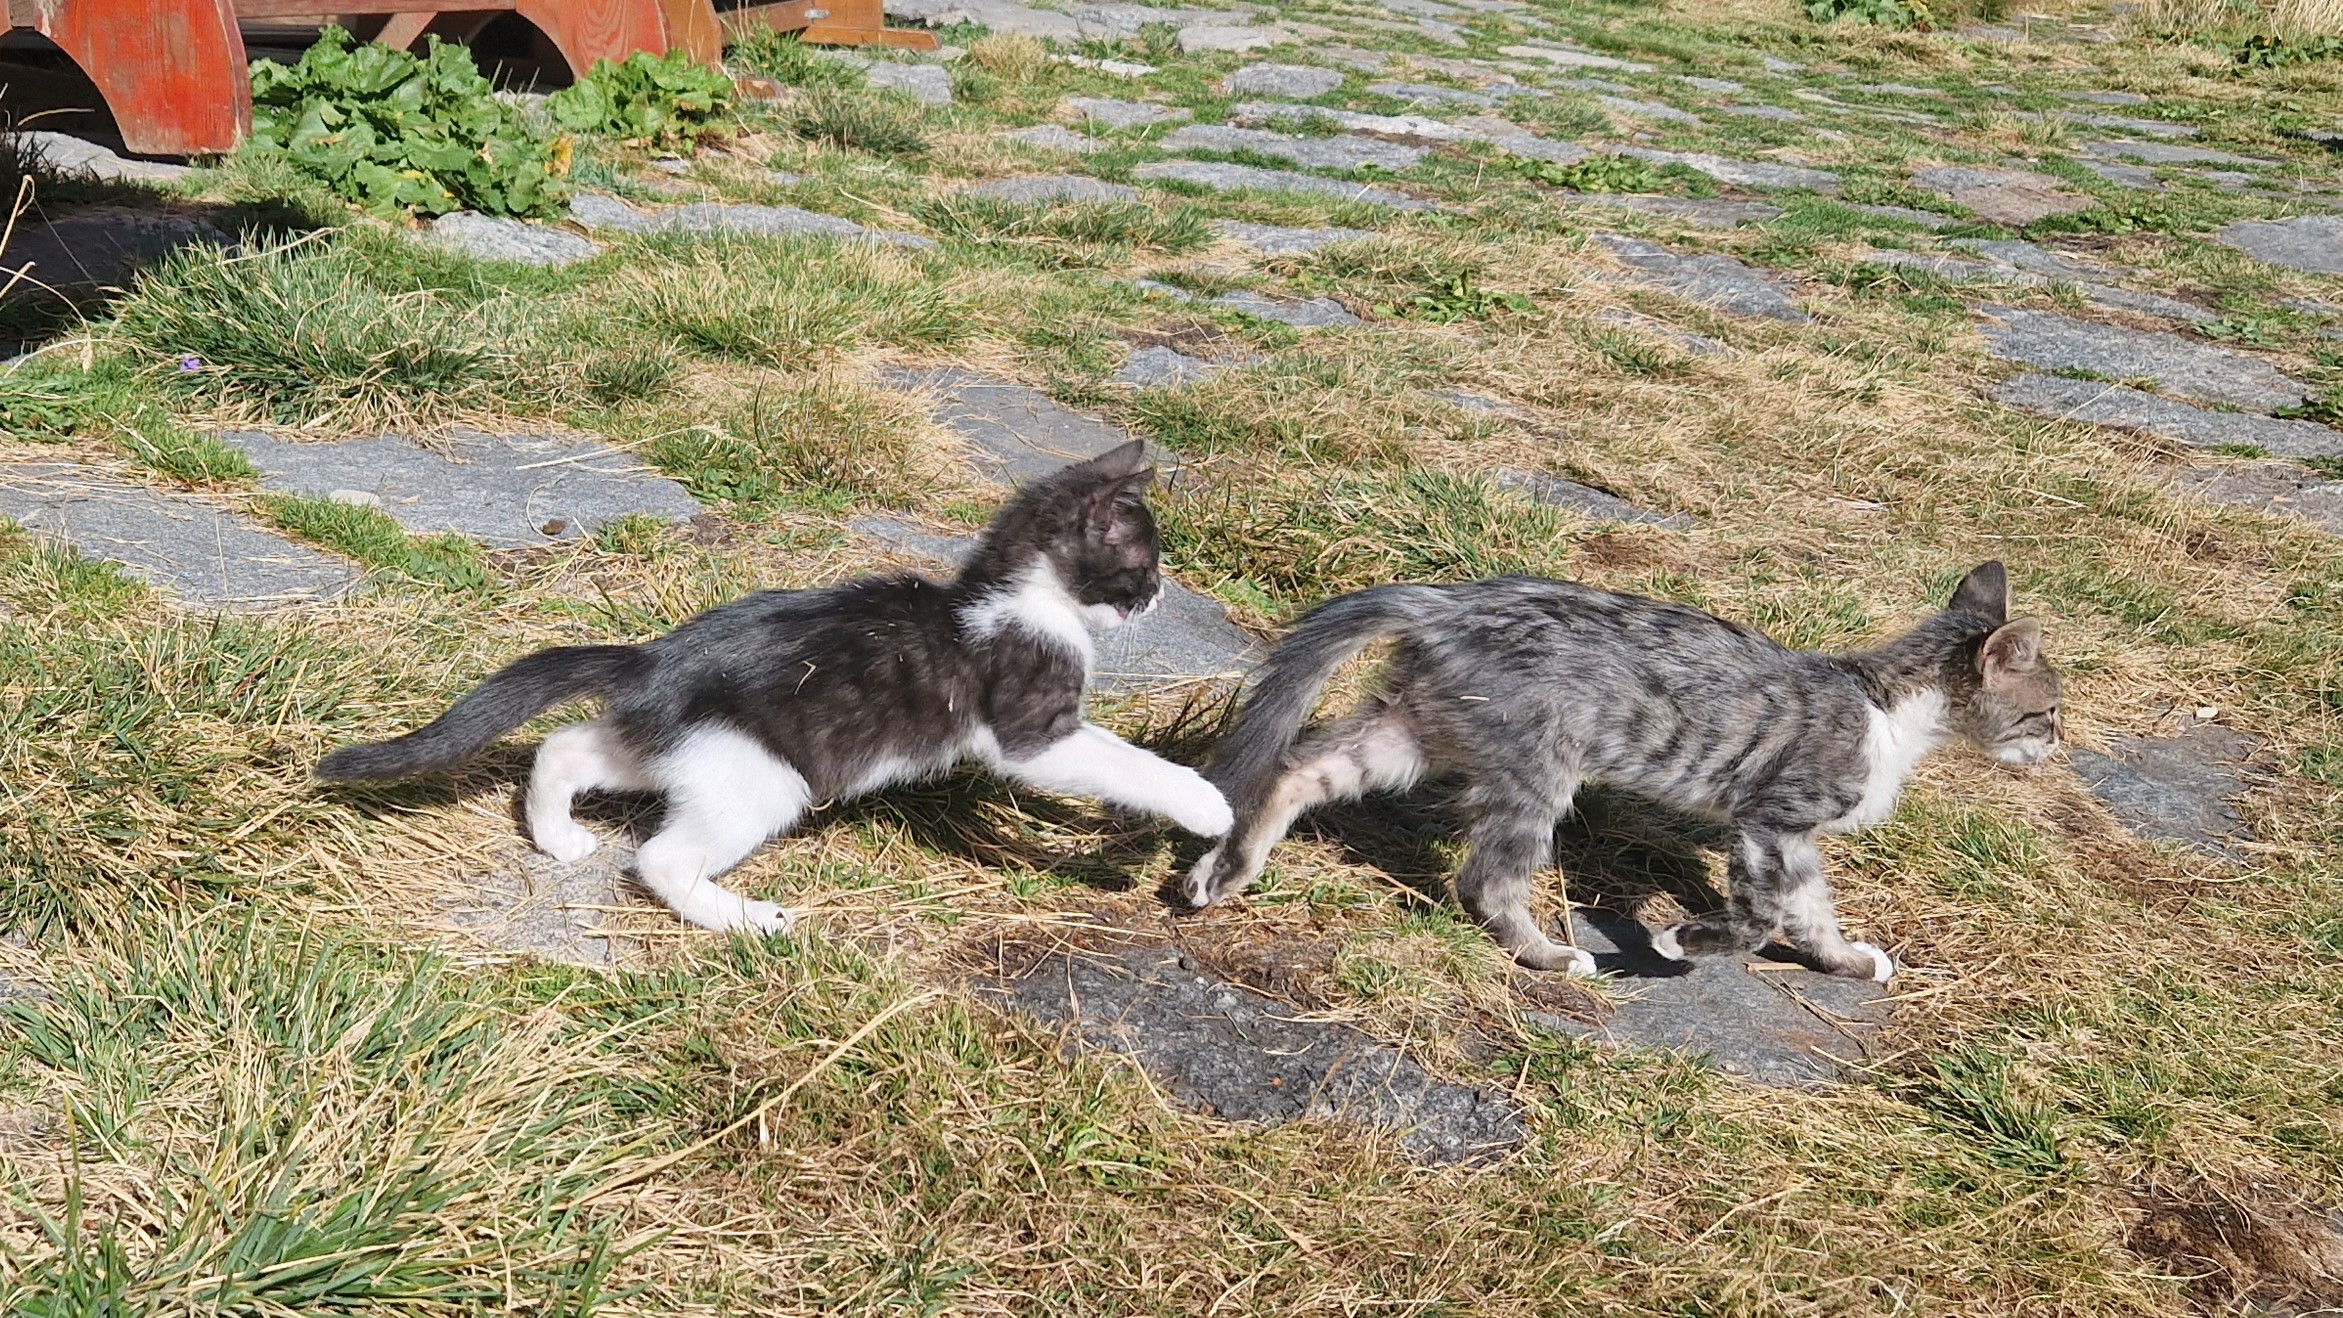 Two small kittens playing beside the mountain hut where they live in the Rila Mountains